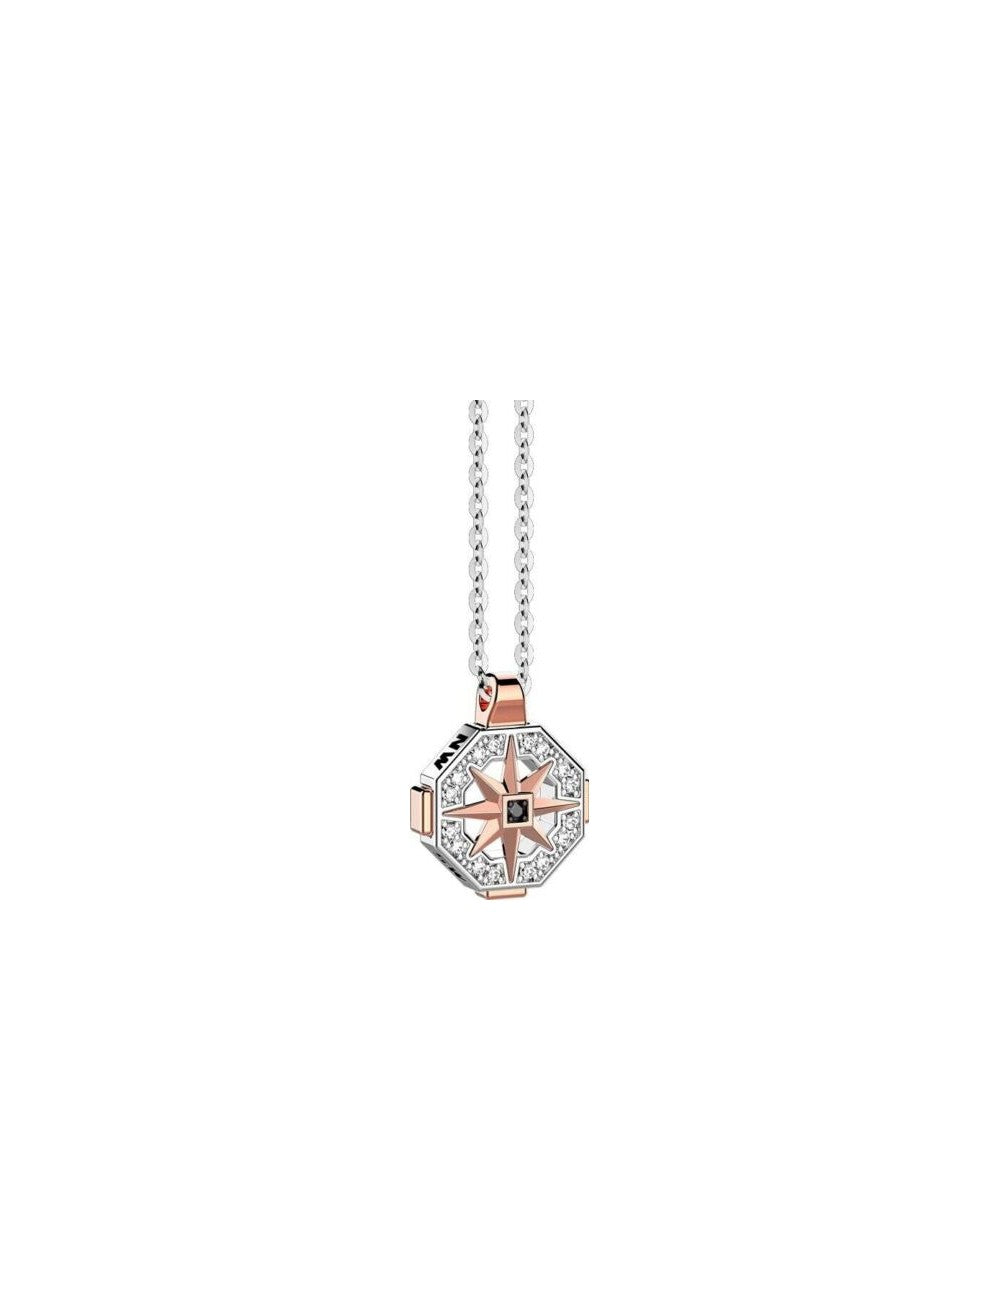 Zancan necklace with Compass Rose in gold for men - EC722BR